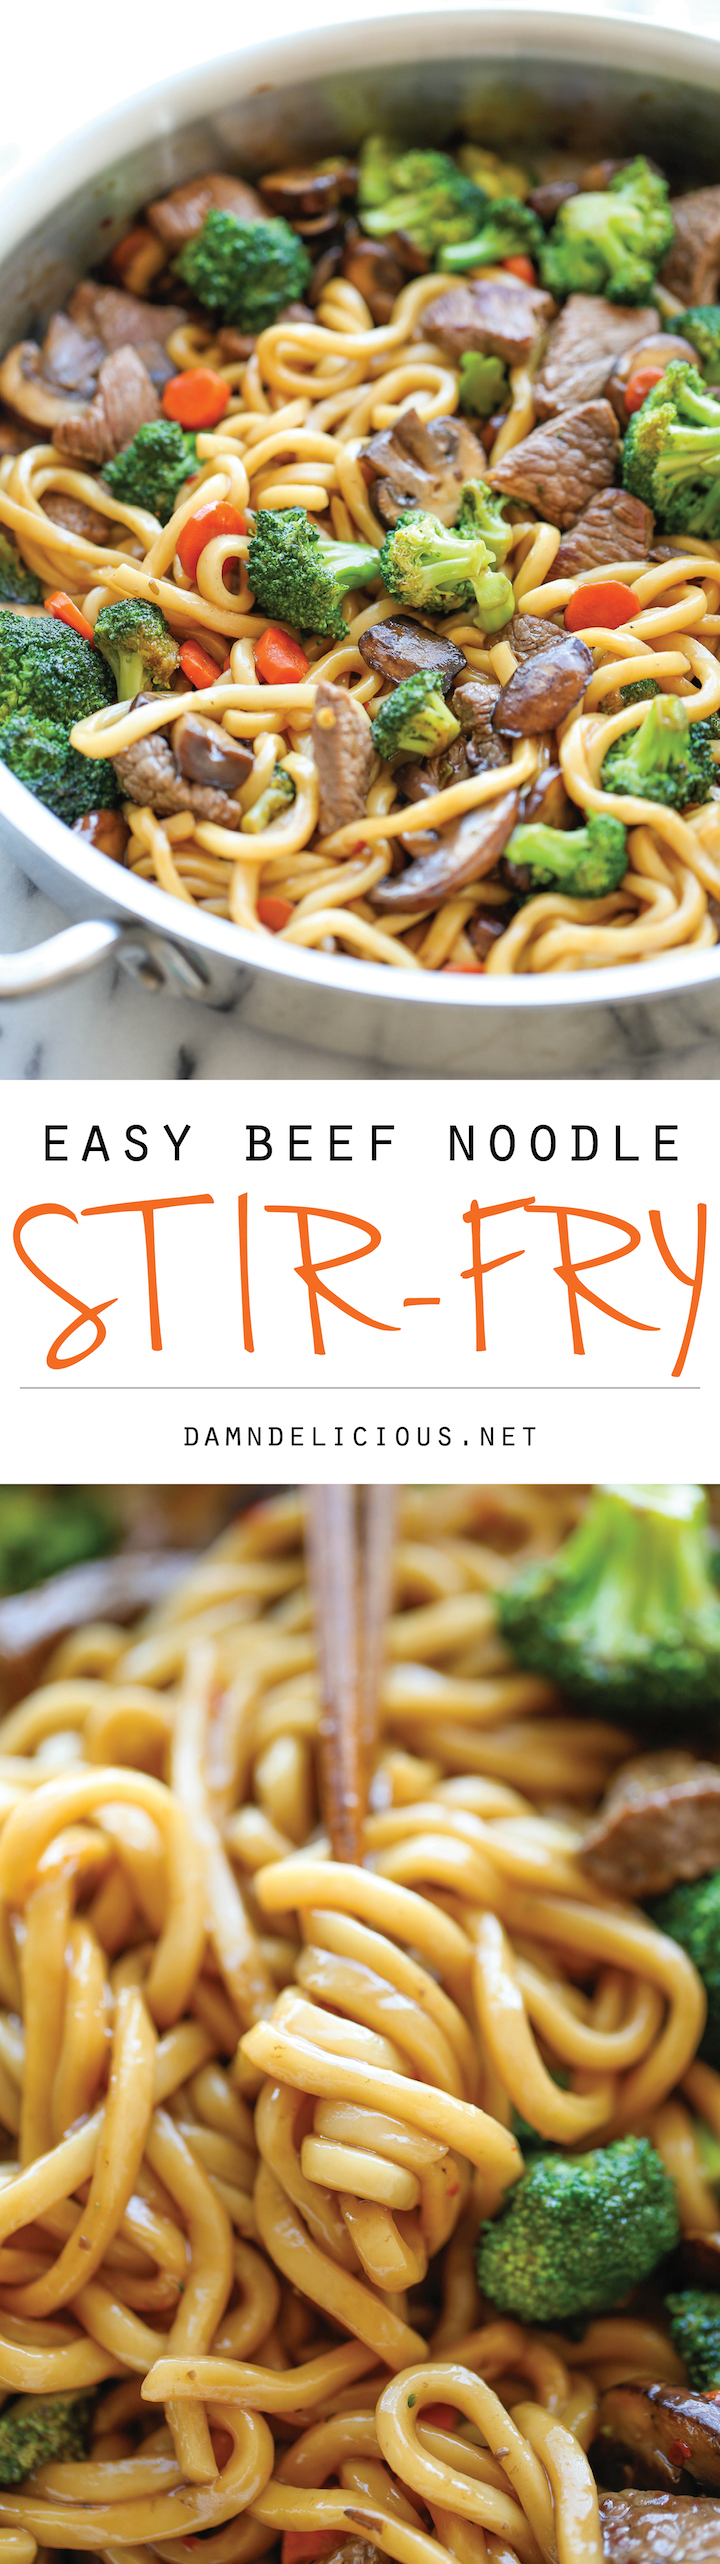 Beef Noodle Stir Fry - The easiest stir fry ever! And you can add in your favorite veggies, making this to be the perfect clean-out-the-fridge type meal!